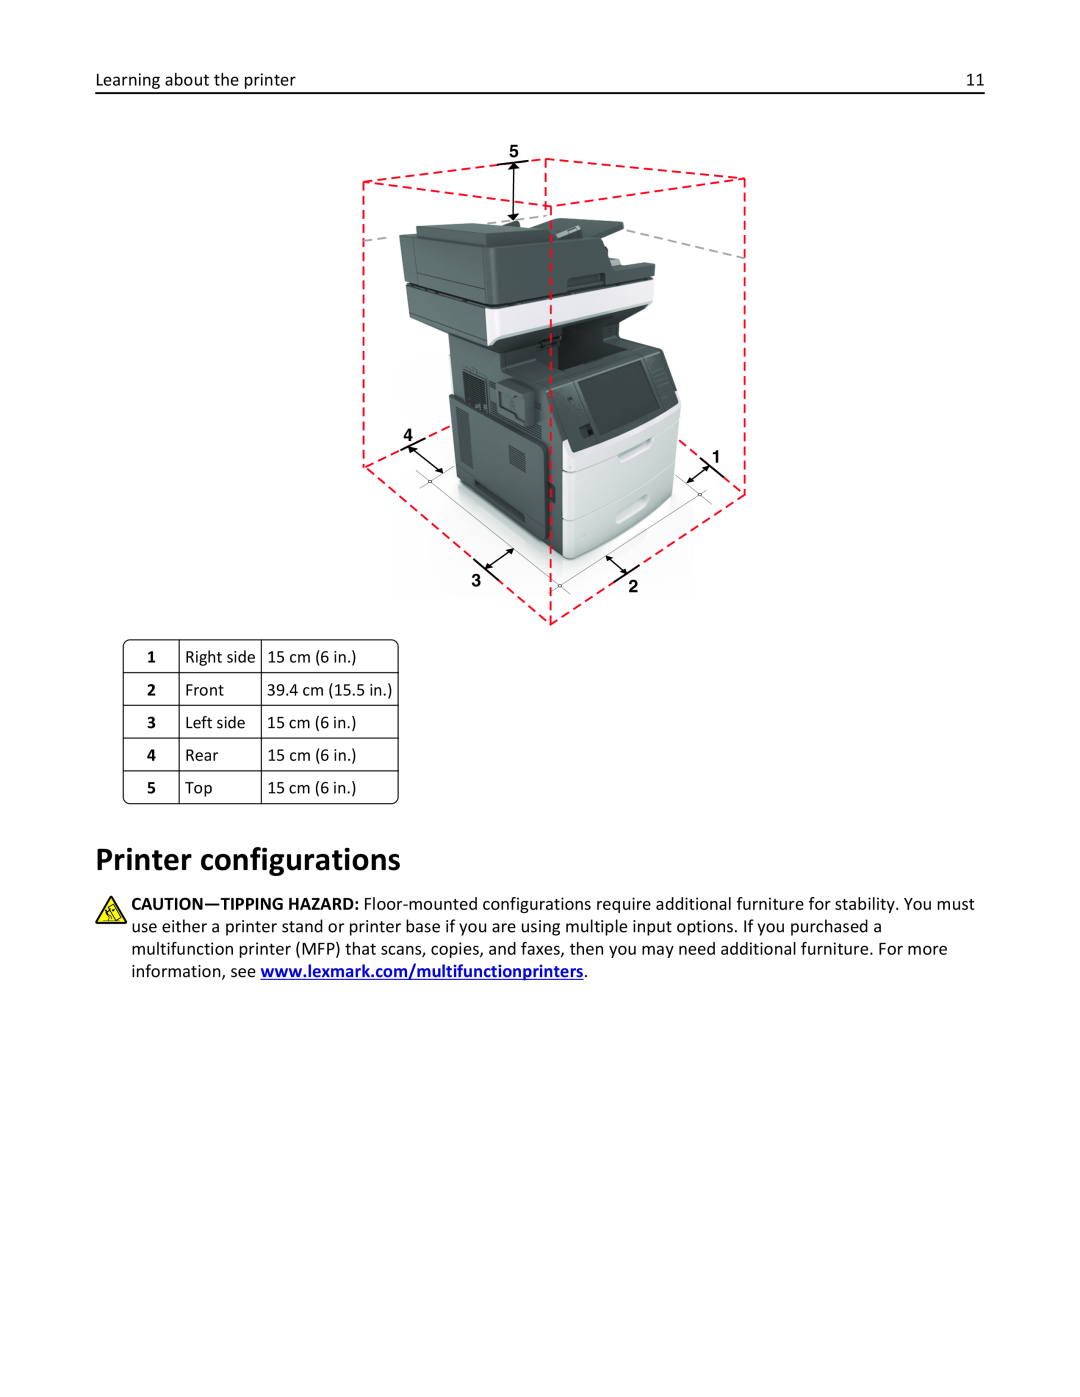 Lexmark MX710DHE, 24T7310, 237, 037 manual Printer configurations, Learning about the printer 